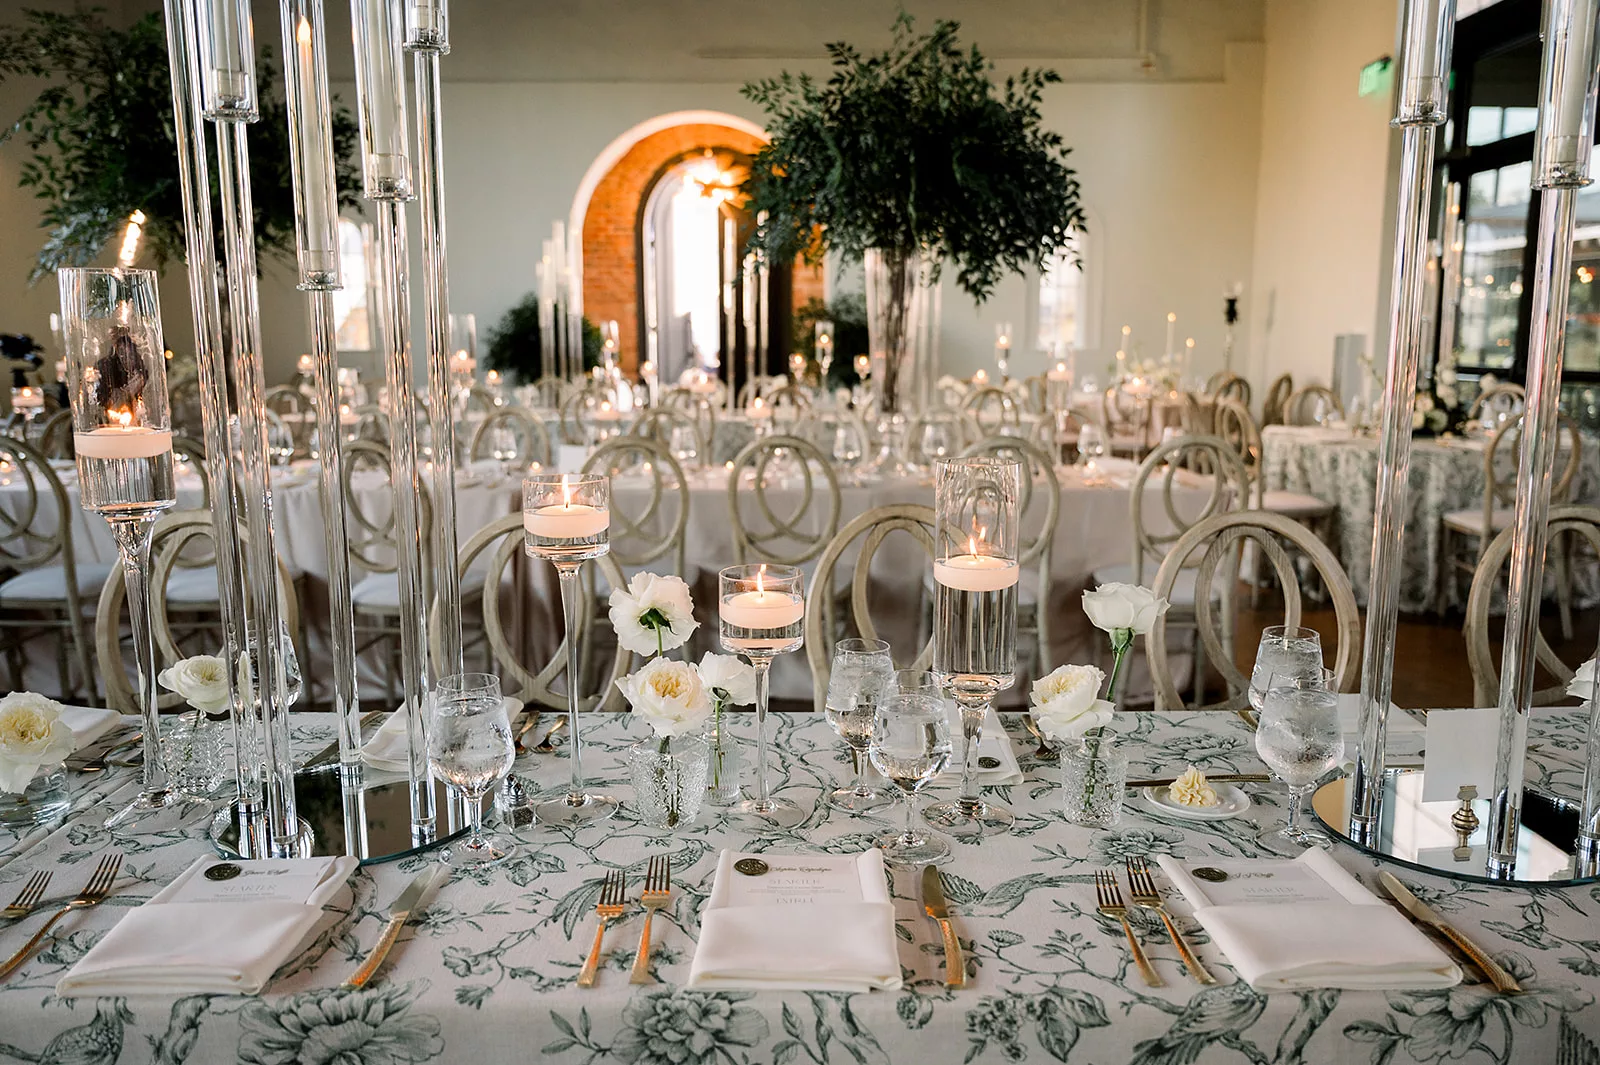 Details of a wedding reception table set up with gold silverware and floral linens